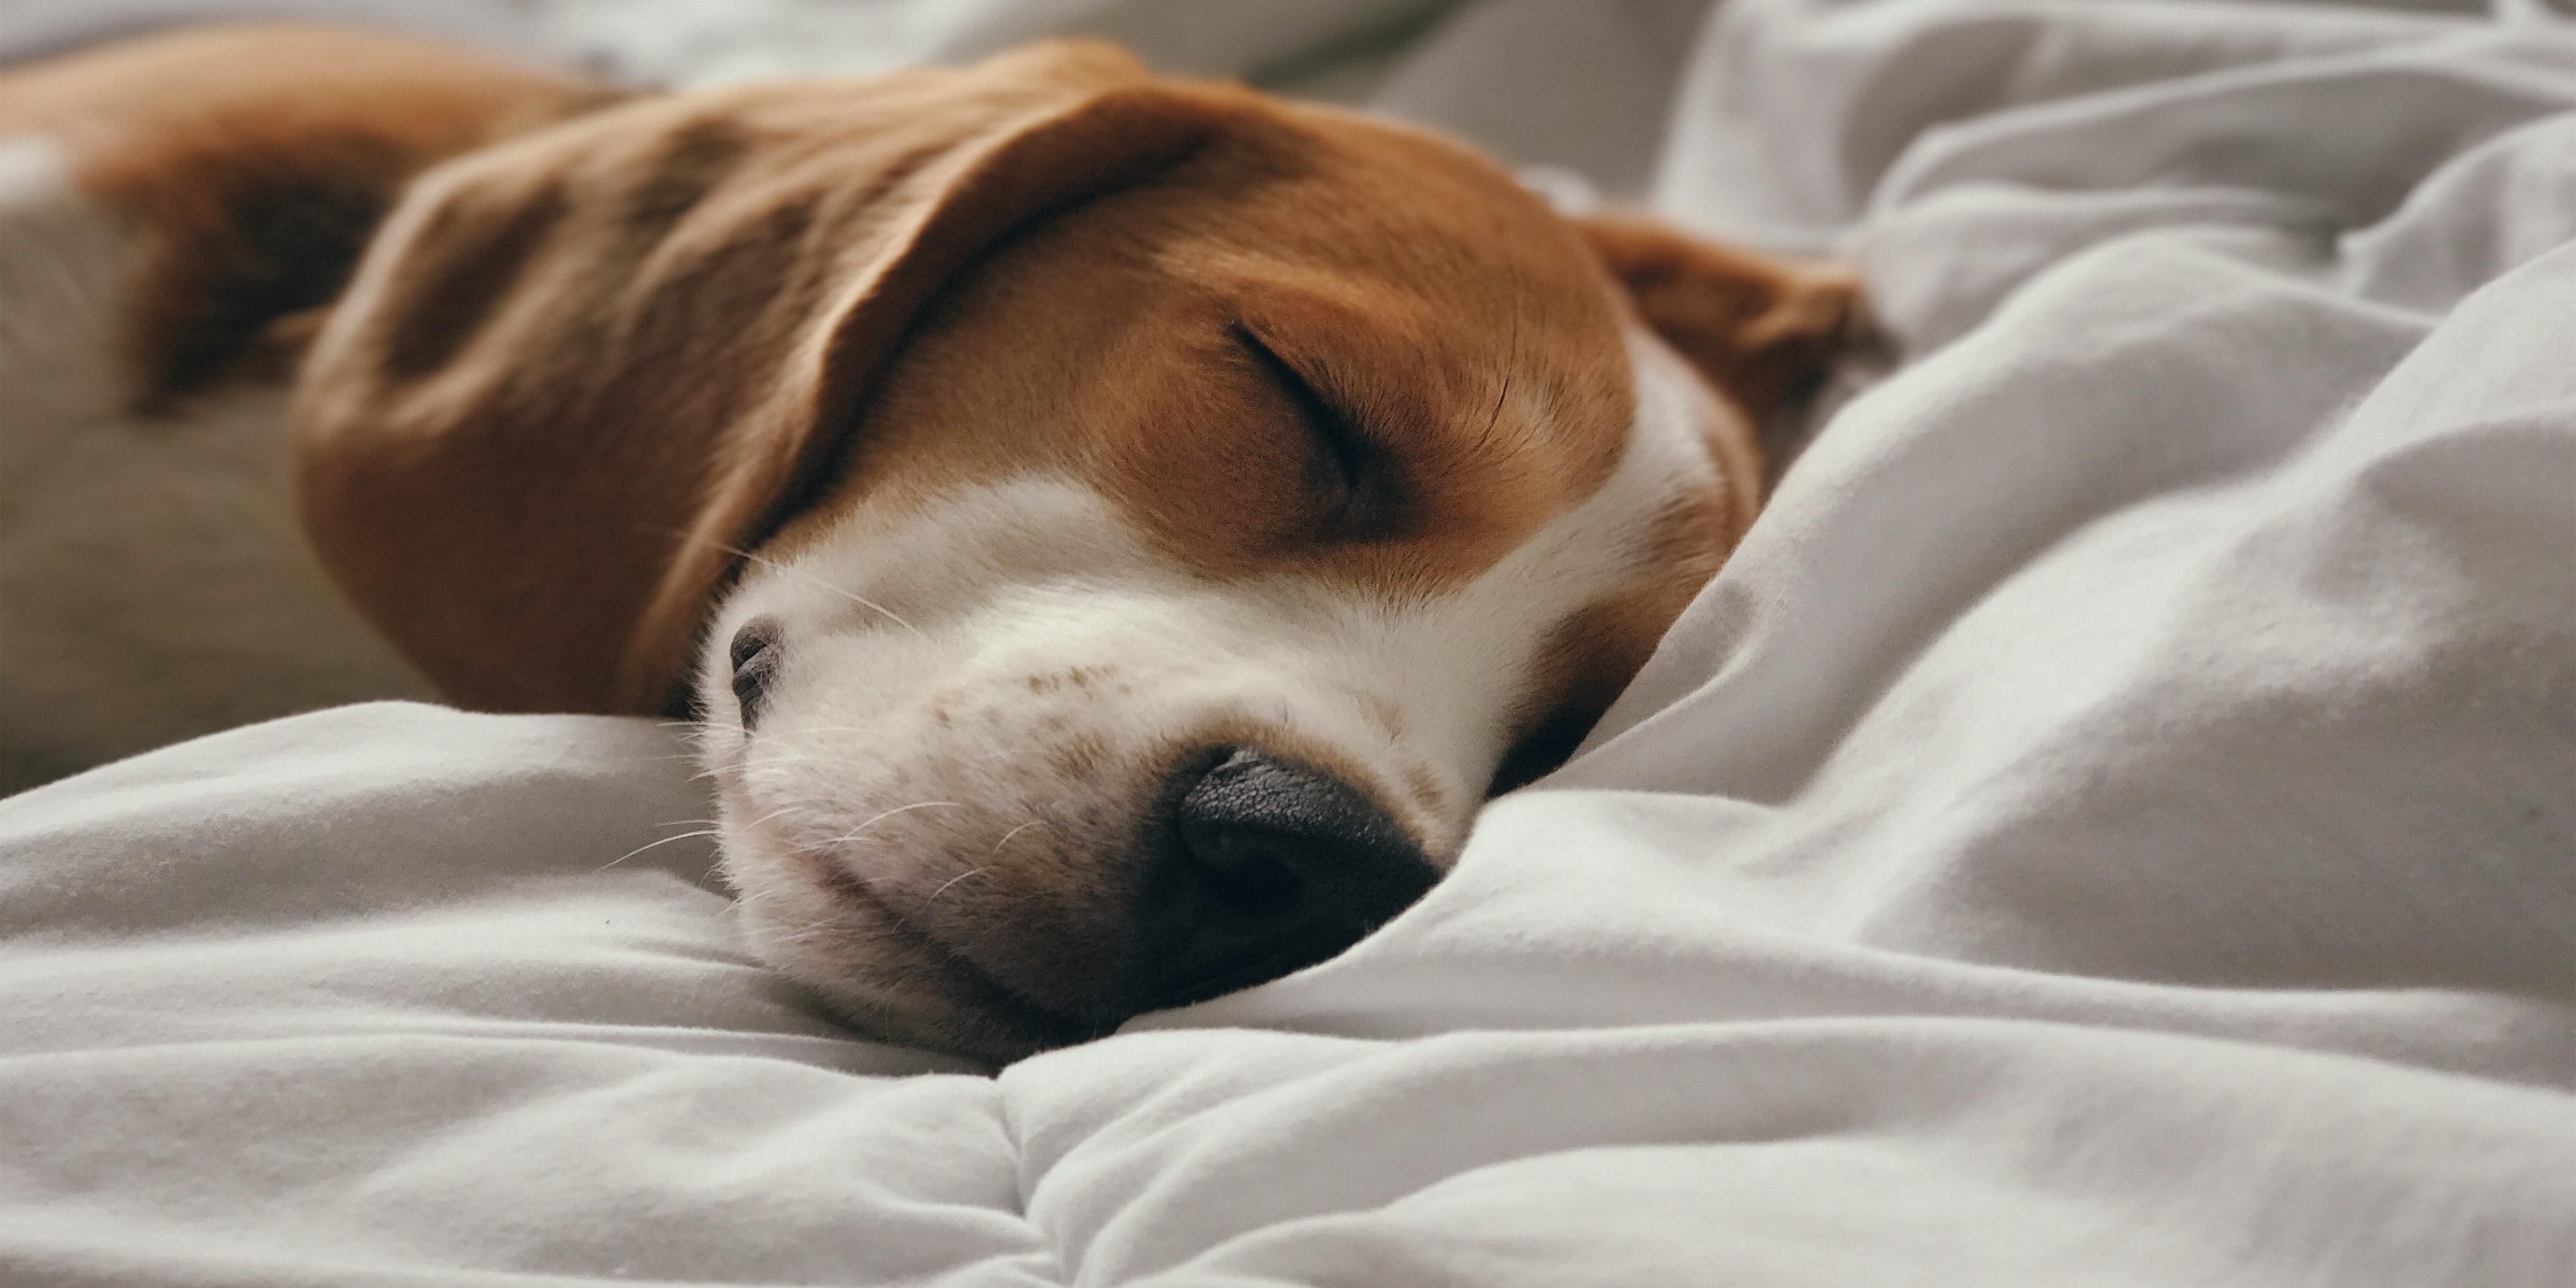 We welcome our four-legged guests and have a limited inventory of "pet friendly" suites available. Be sure to let us know when you make your reservation so we can check availability and assign your pet friendly suite! A pet fee of $25 CAD applies per night. Some restrictions may apply.